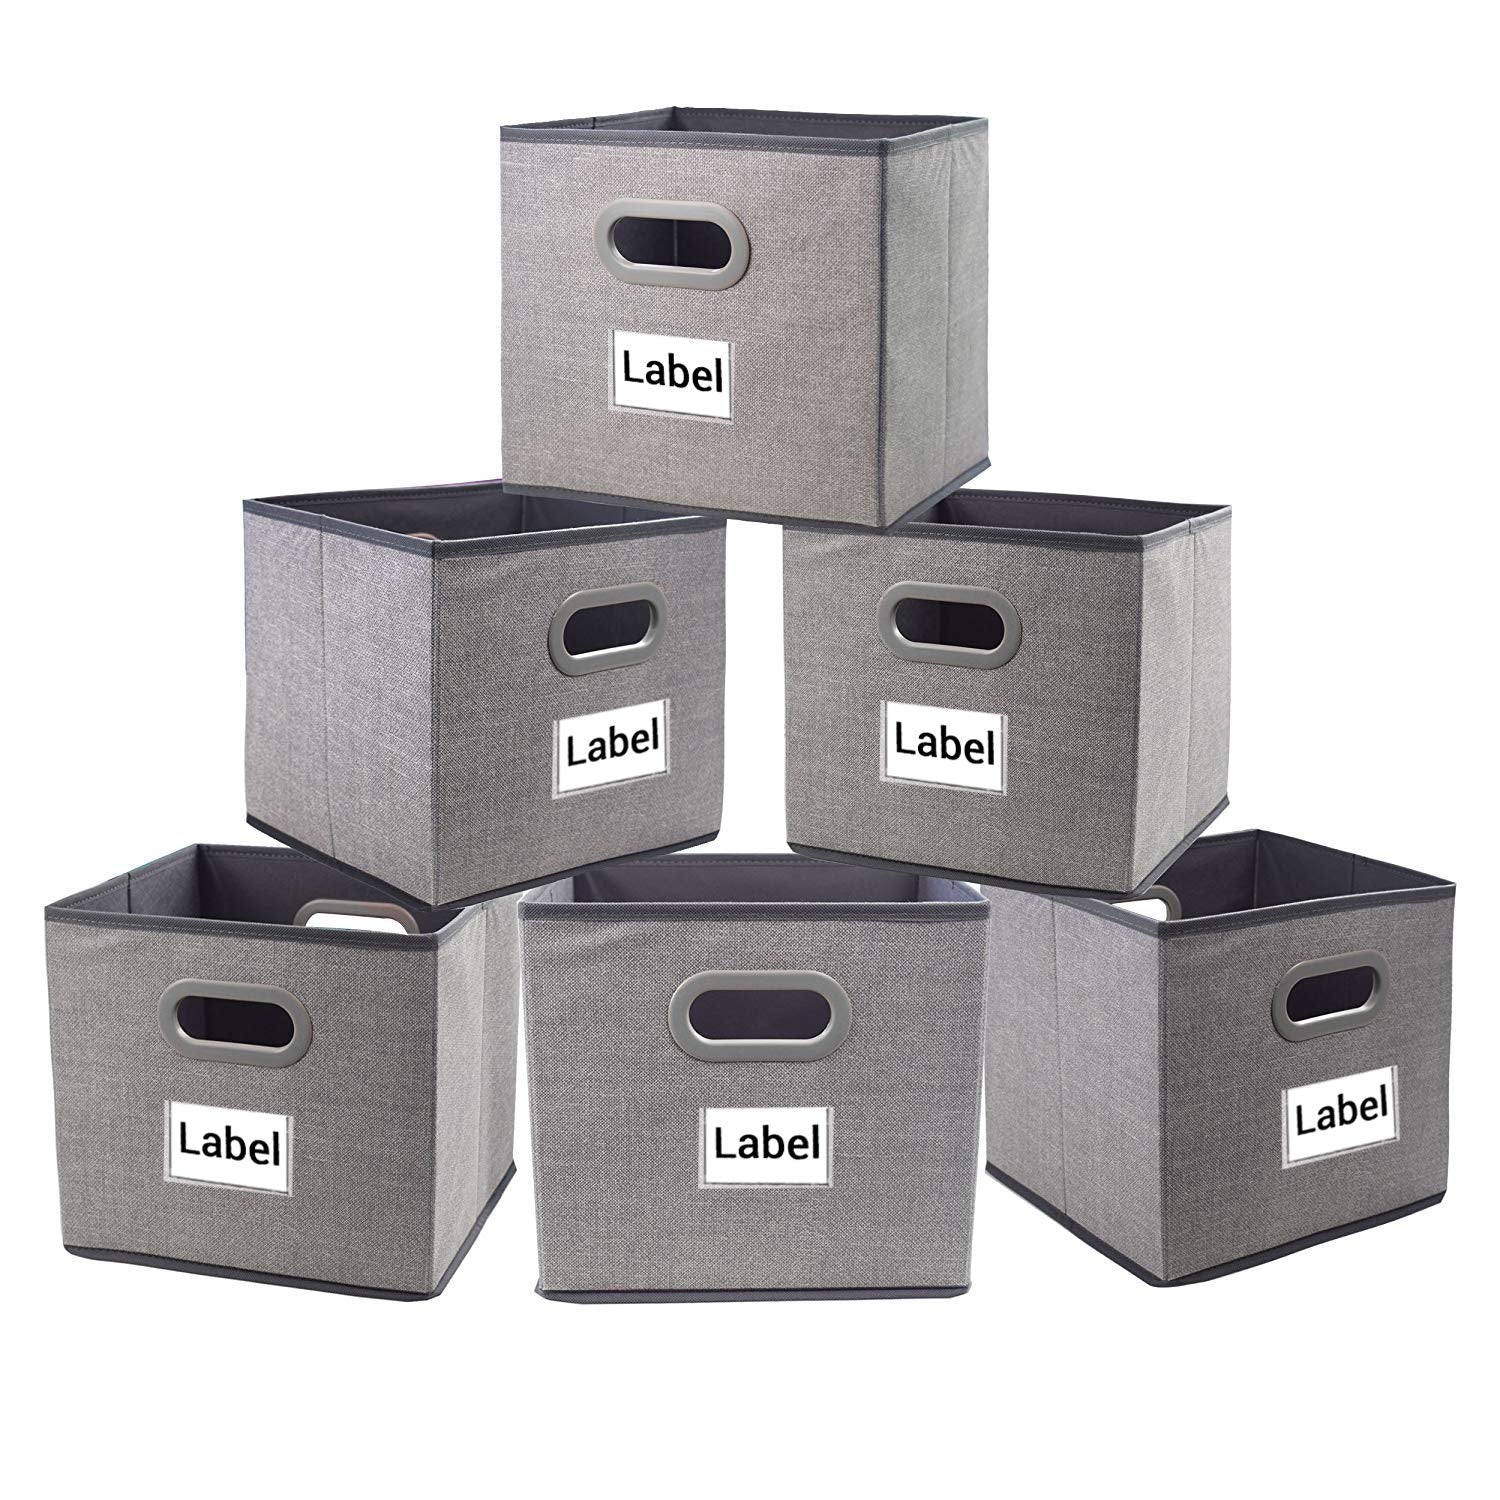 Homyfort Cube Storage Bins,Foldable Cloth Boxes Baskets Organizer for Closet,Home,Office, Bedroom with Plastic Handles Set of 6 Grey Large 12x12x12